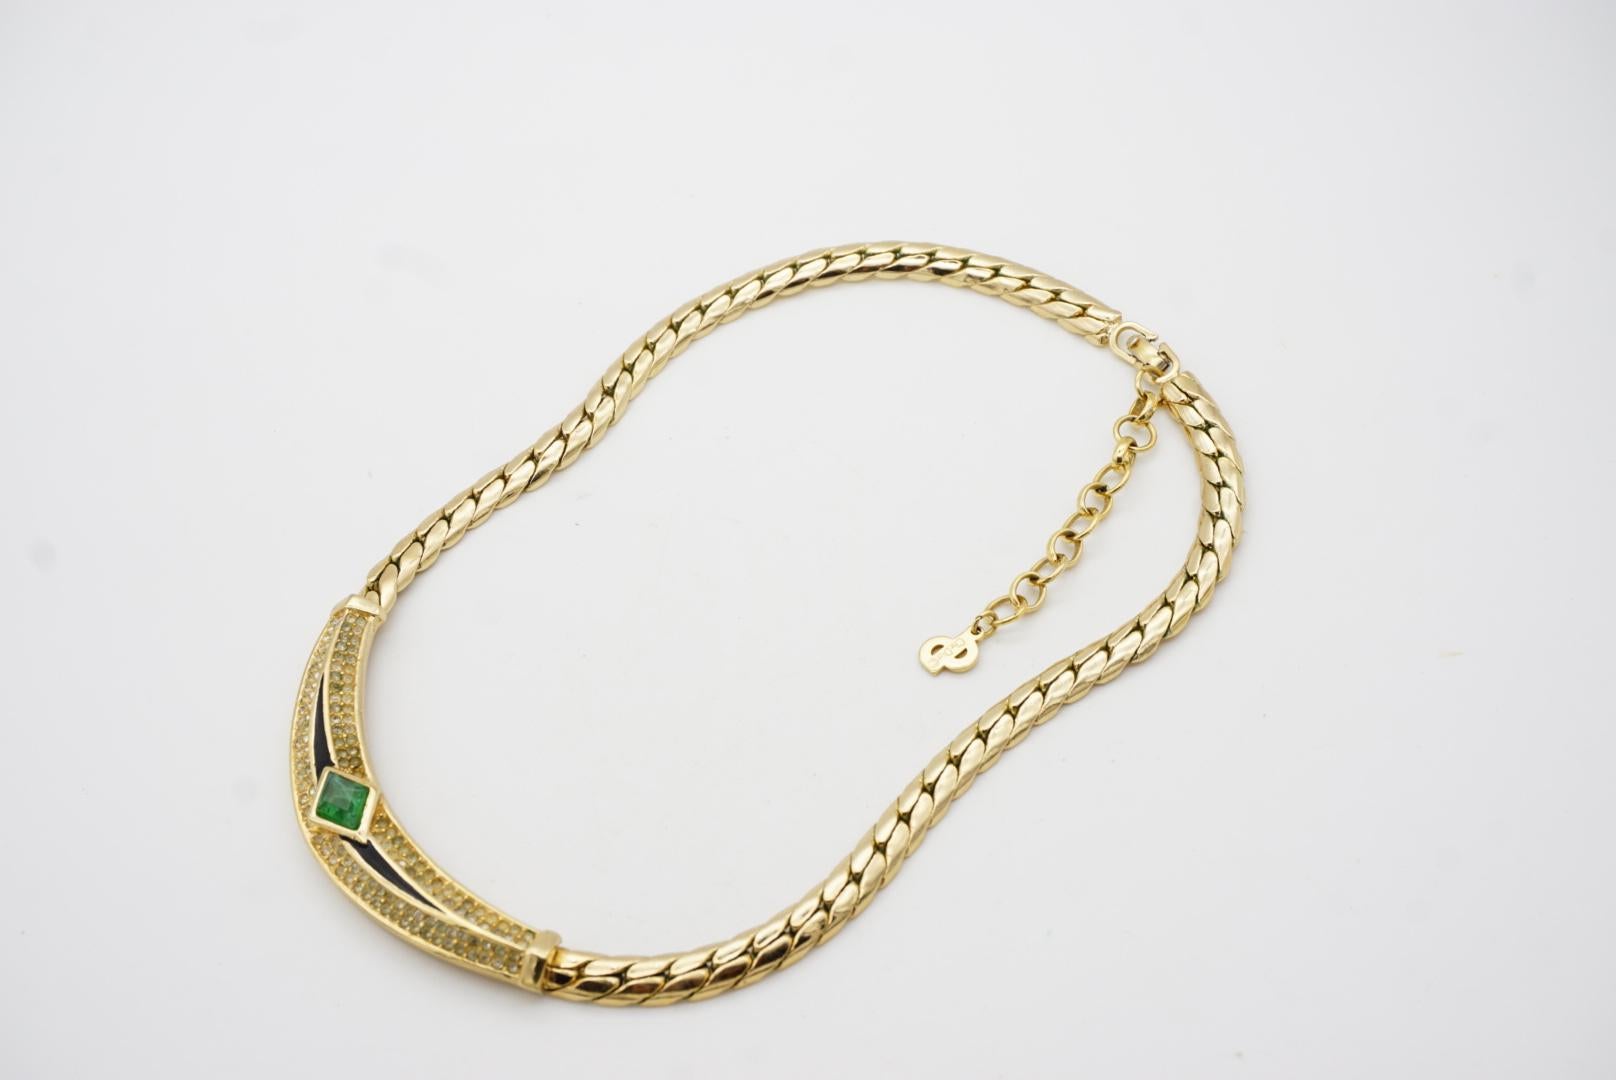 Christian Dior Vintage 1980s Emerald Green Gripoix Black Crystals Gold Necklace For Sale 7